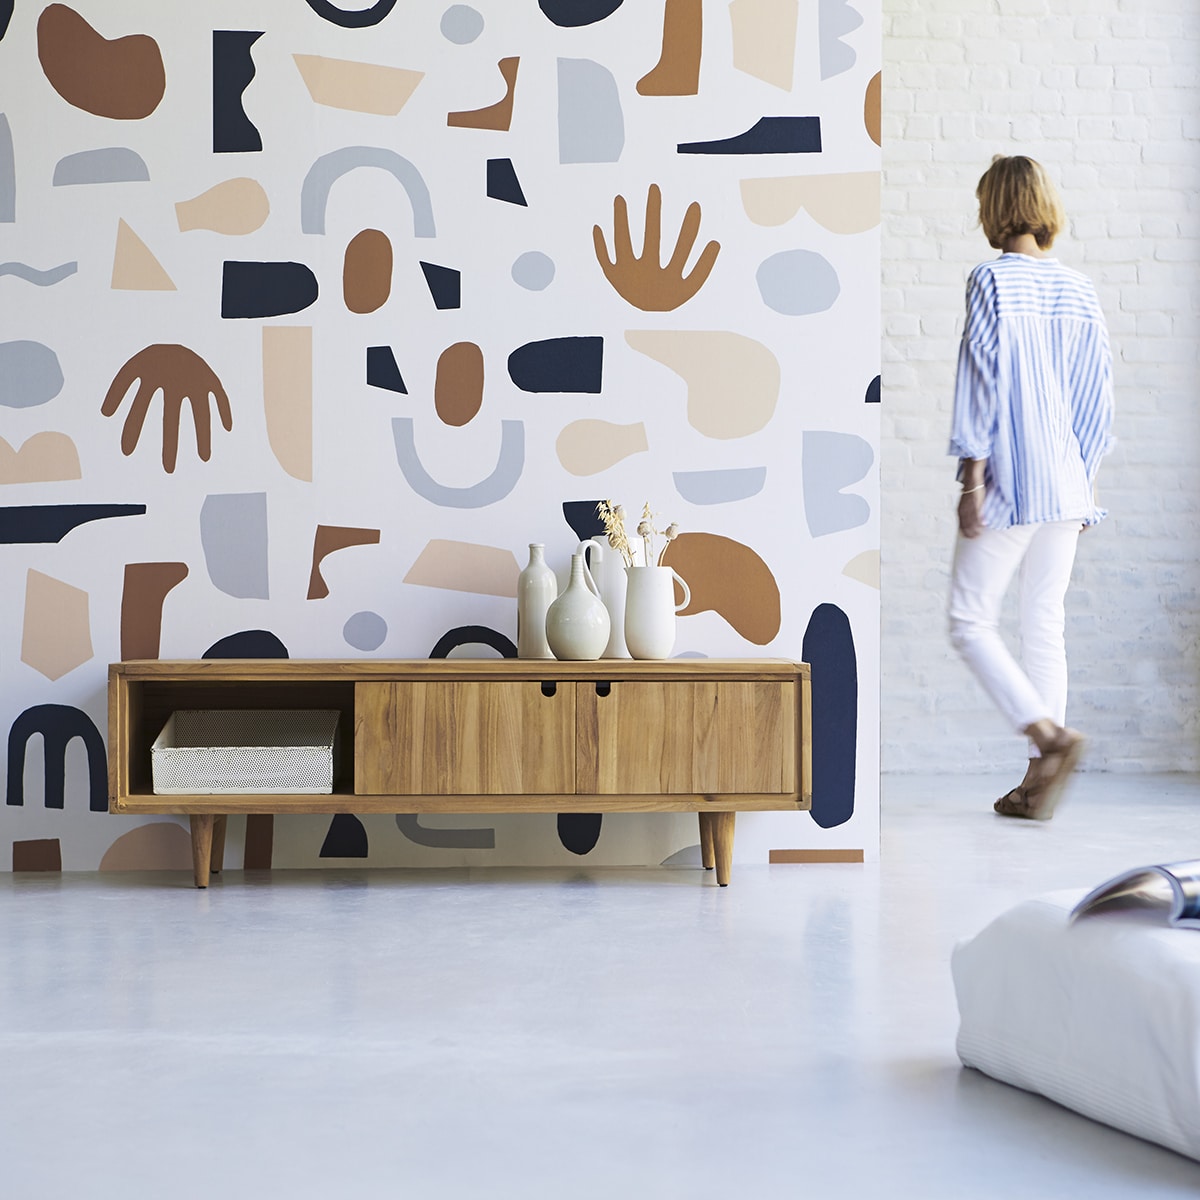 Read more about the article “Mural Wallpaper”: Wallpaper, a style statement